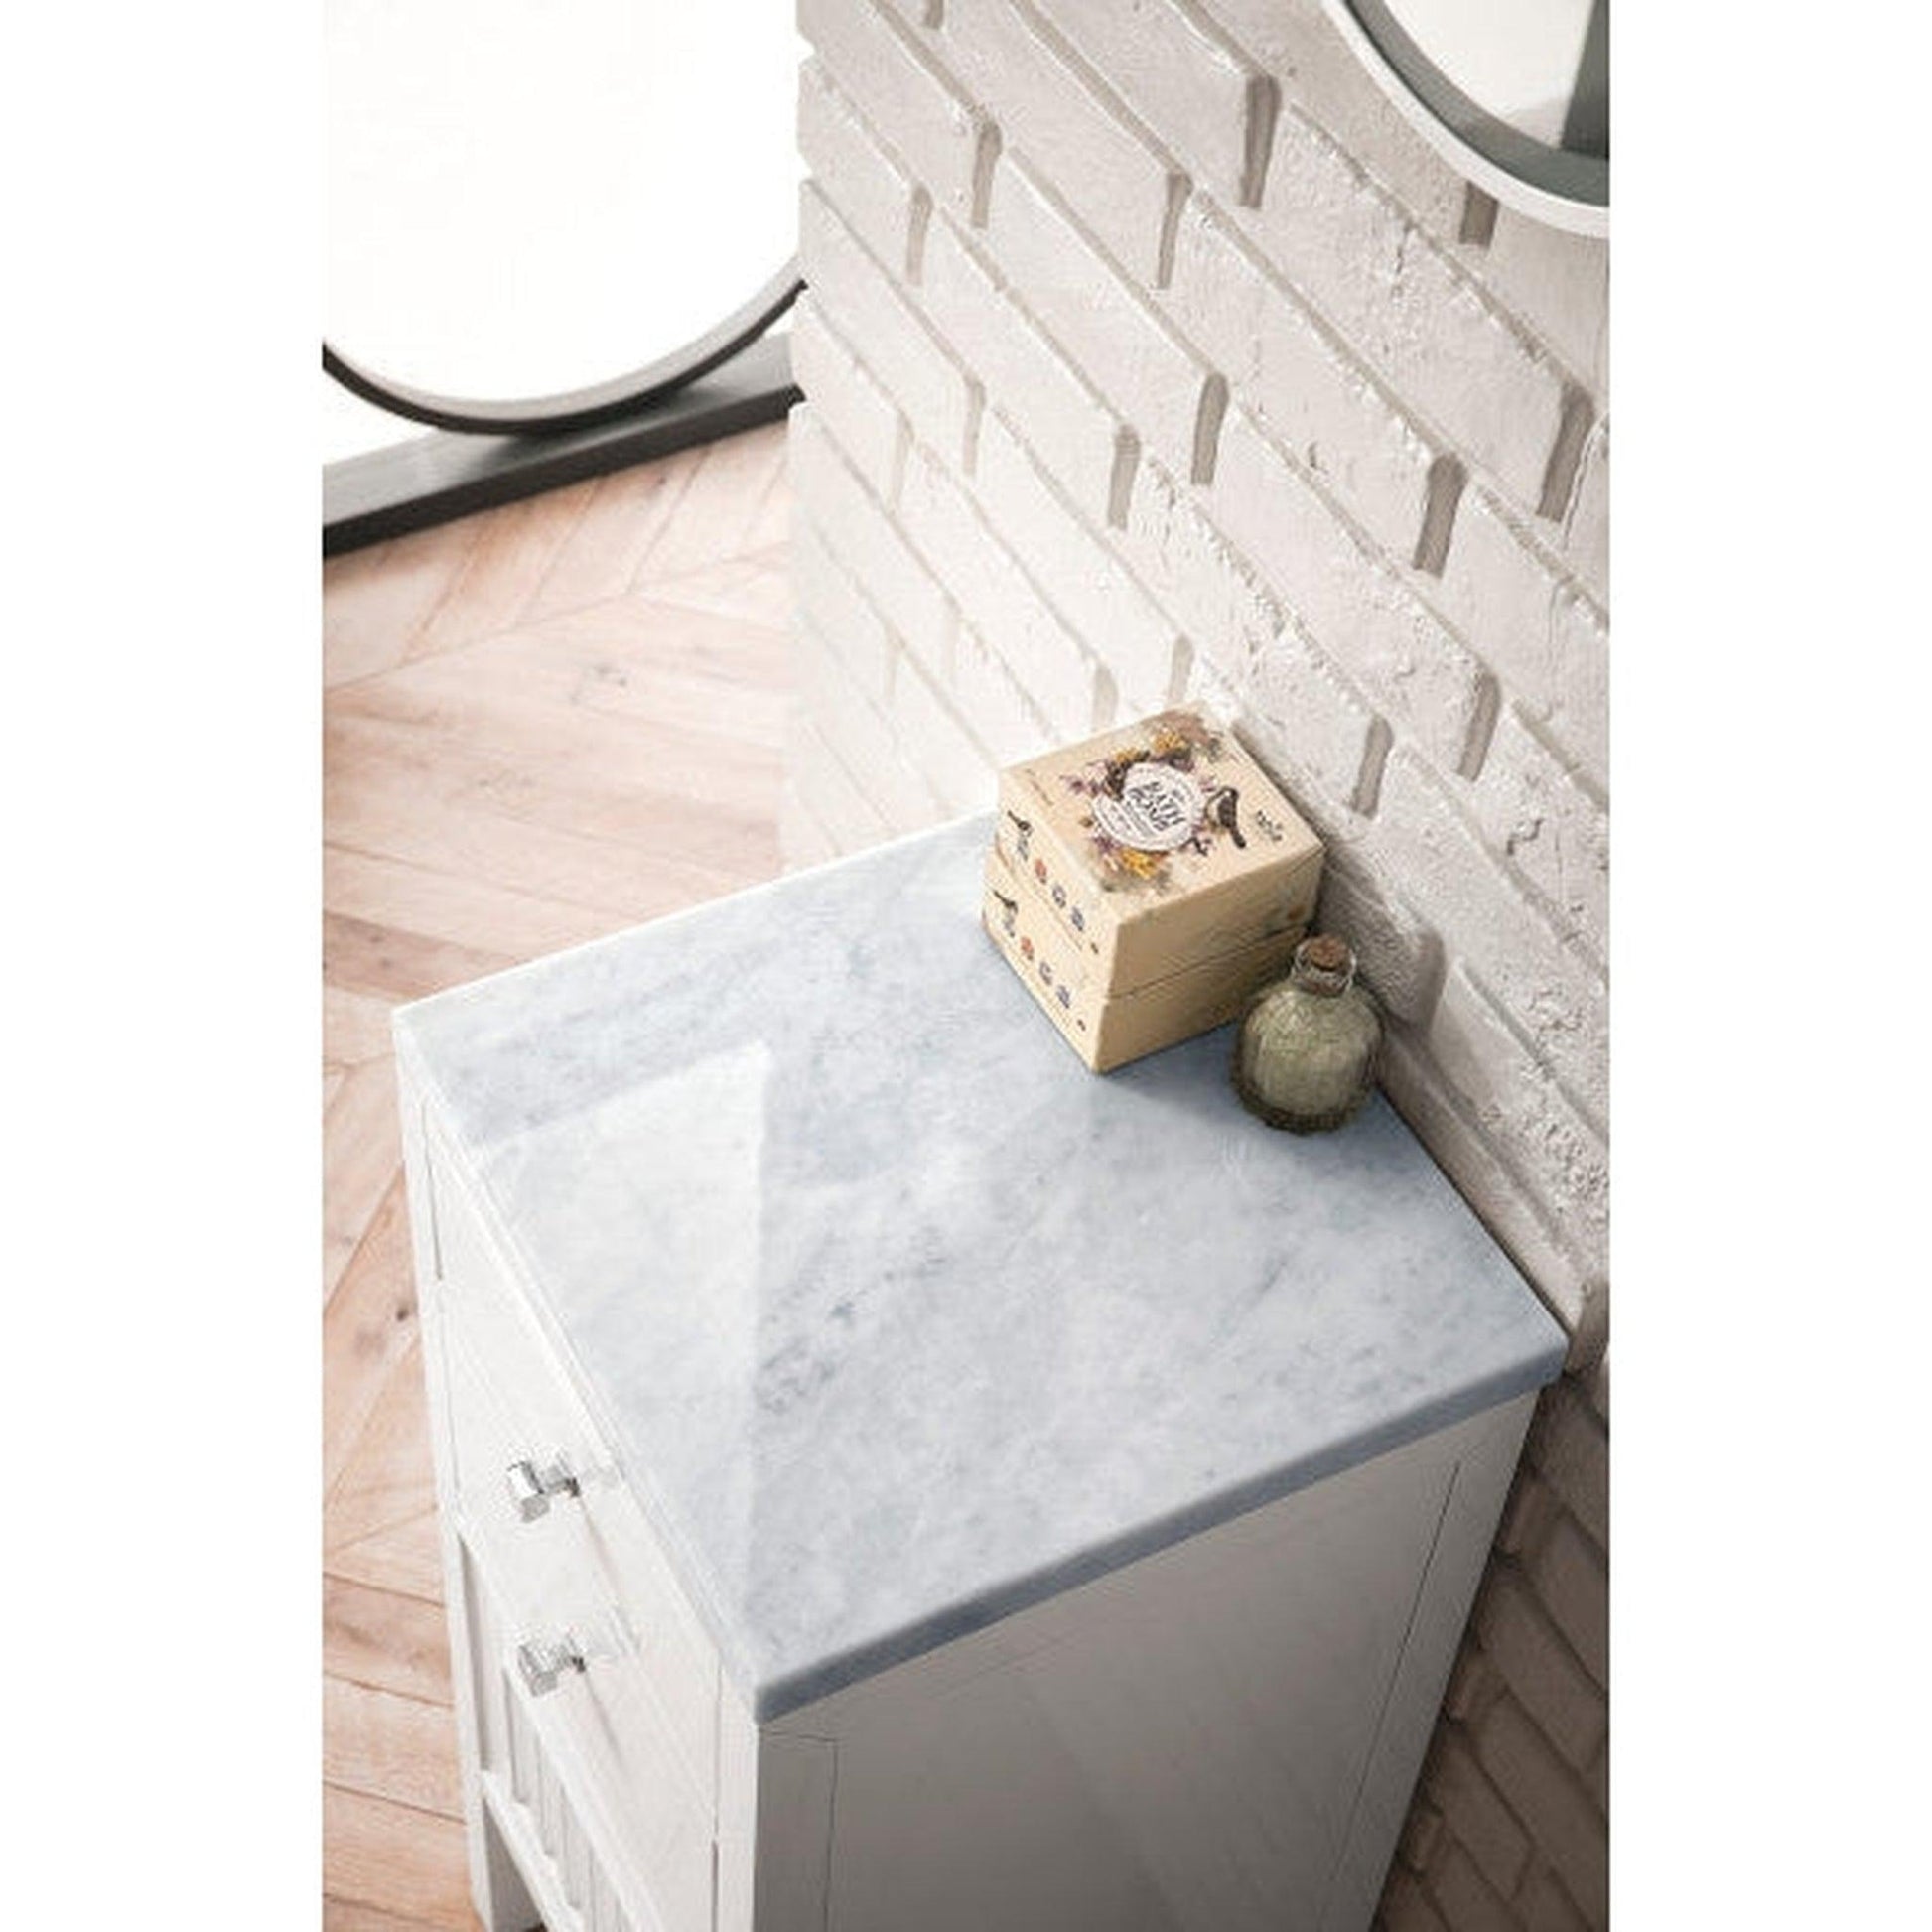 James Martin Athens 15" Left Side Opening Glossy White Side Cabinet With 1" Carrara Marble Top